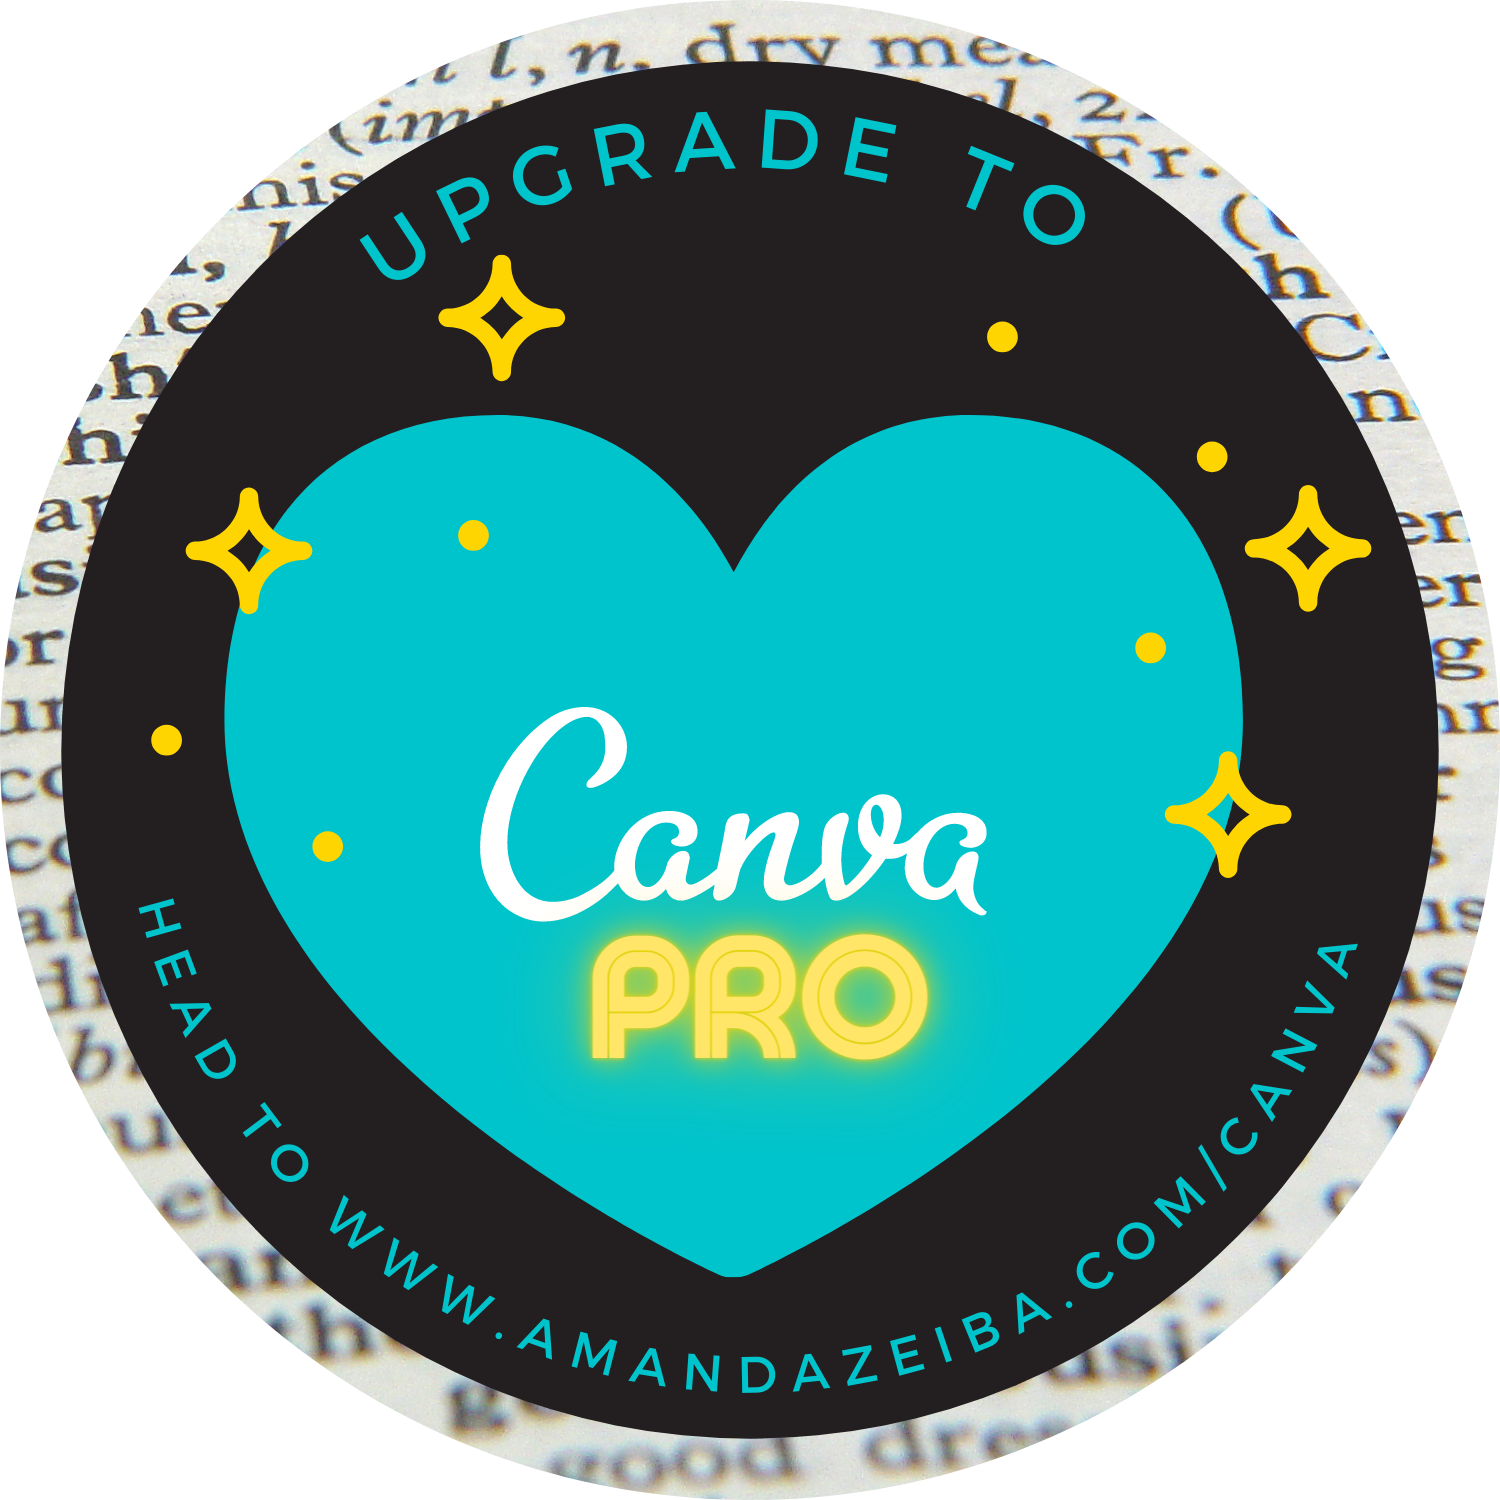 Upgrade to Canva Pro today!